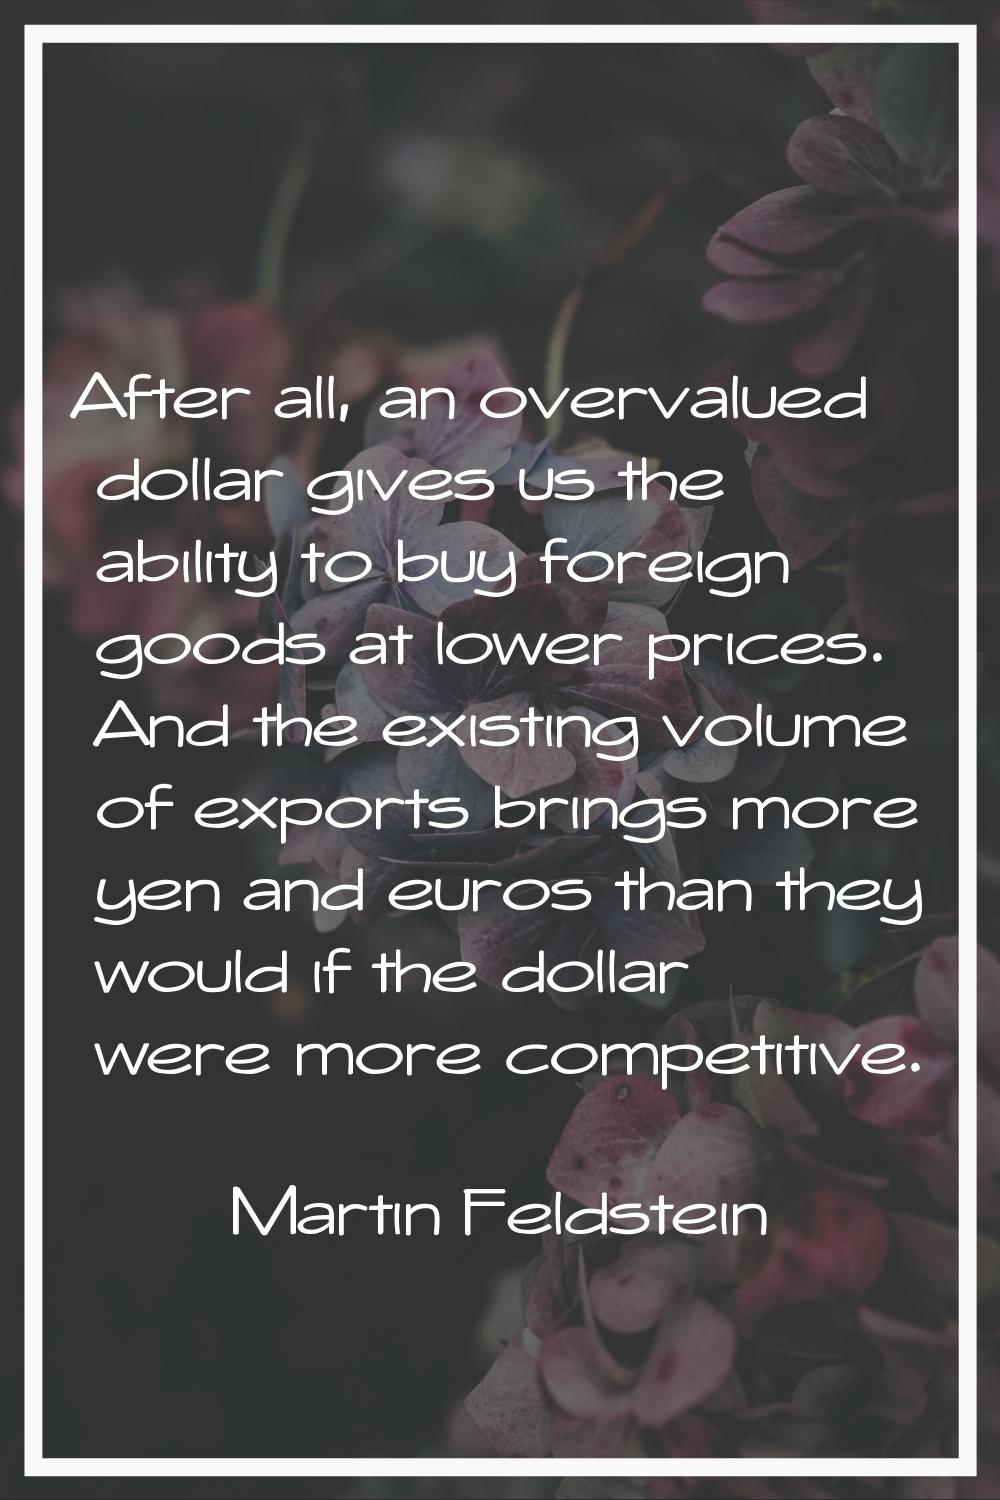 After all, an overvalued dollar gives us the ability to buy foreign goods at lower prices. And the 